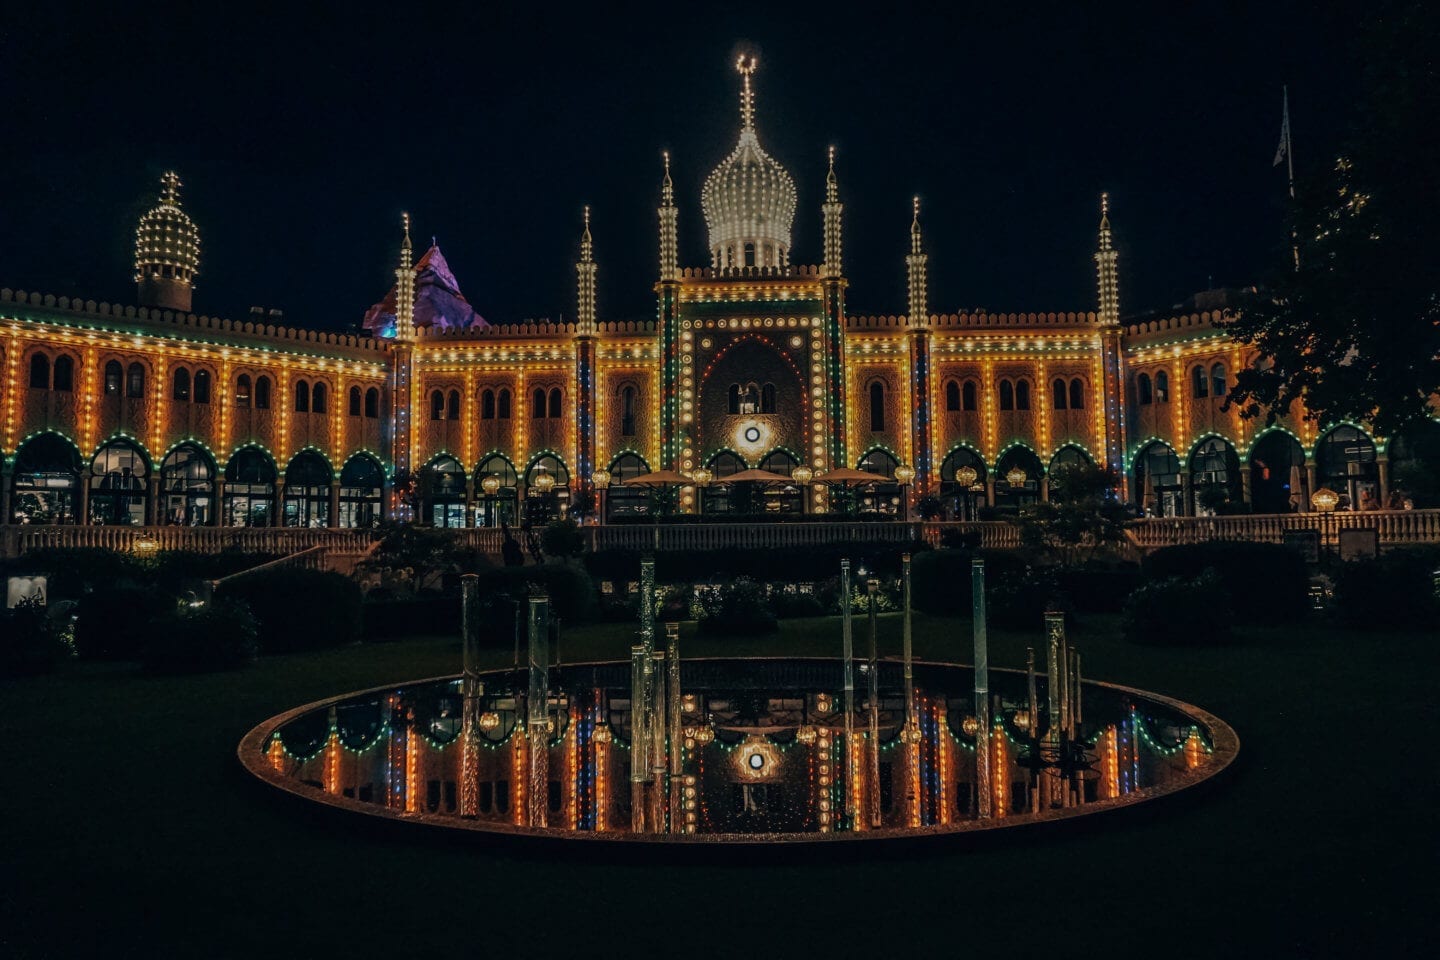 #Copenhagen Itinerary: 4 Days for First-Time Visitors - Tivoli Gardens at night all lit up!